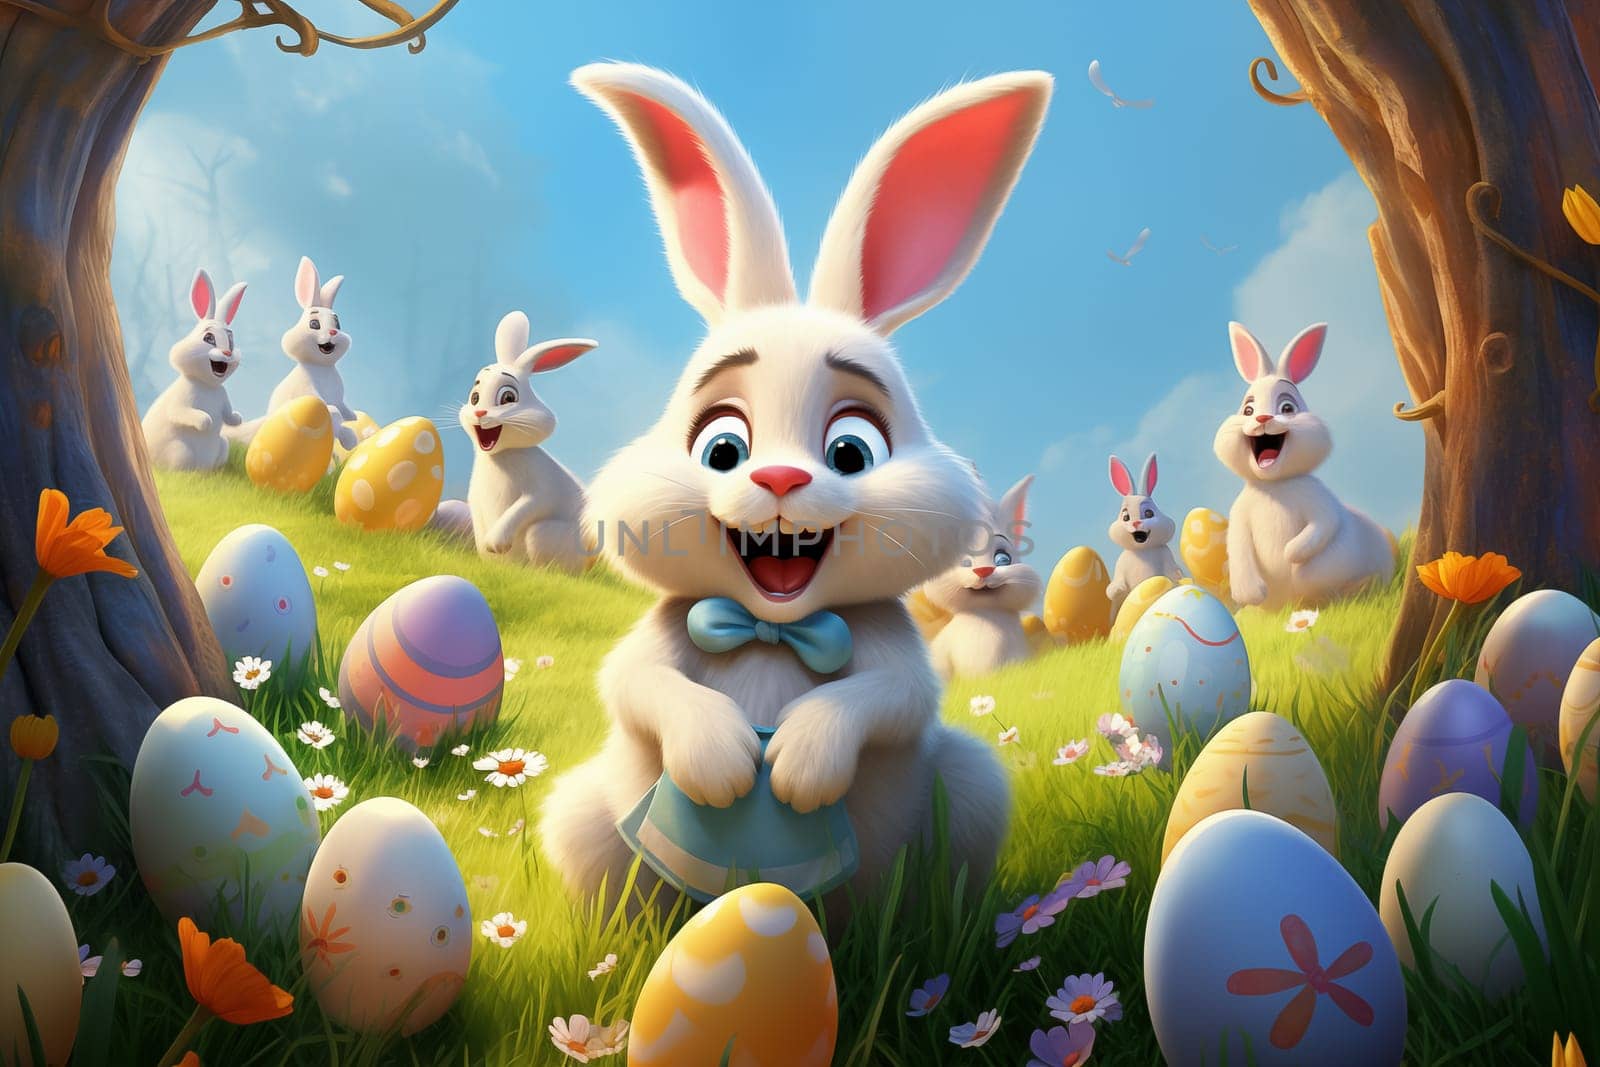 Easter background, Disney style illustrations by Nadtochiy